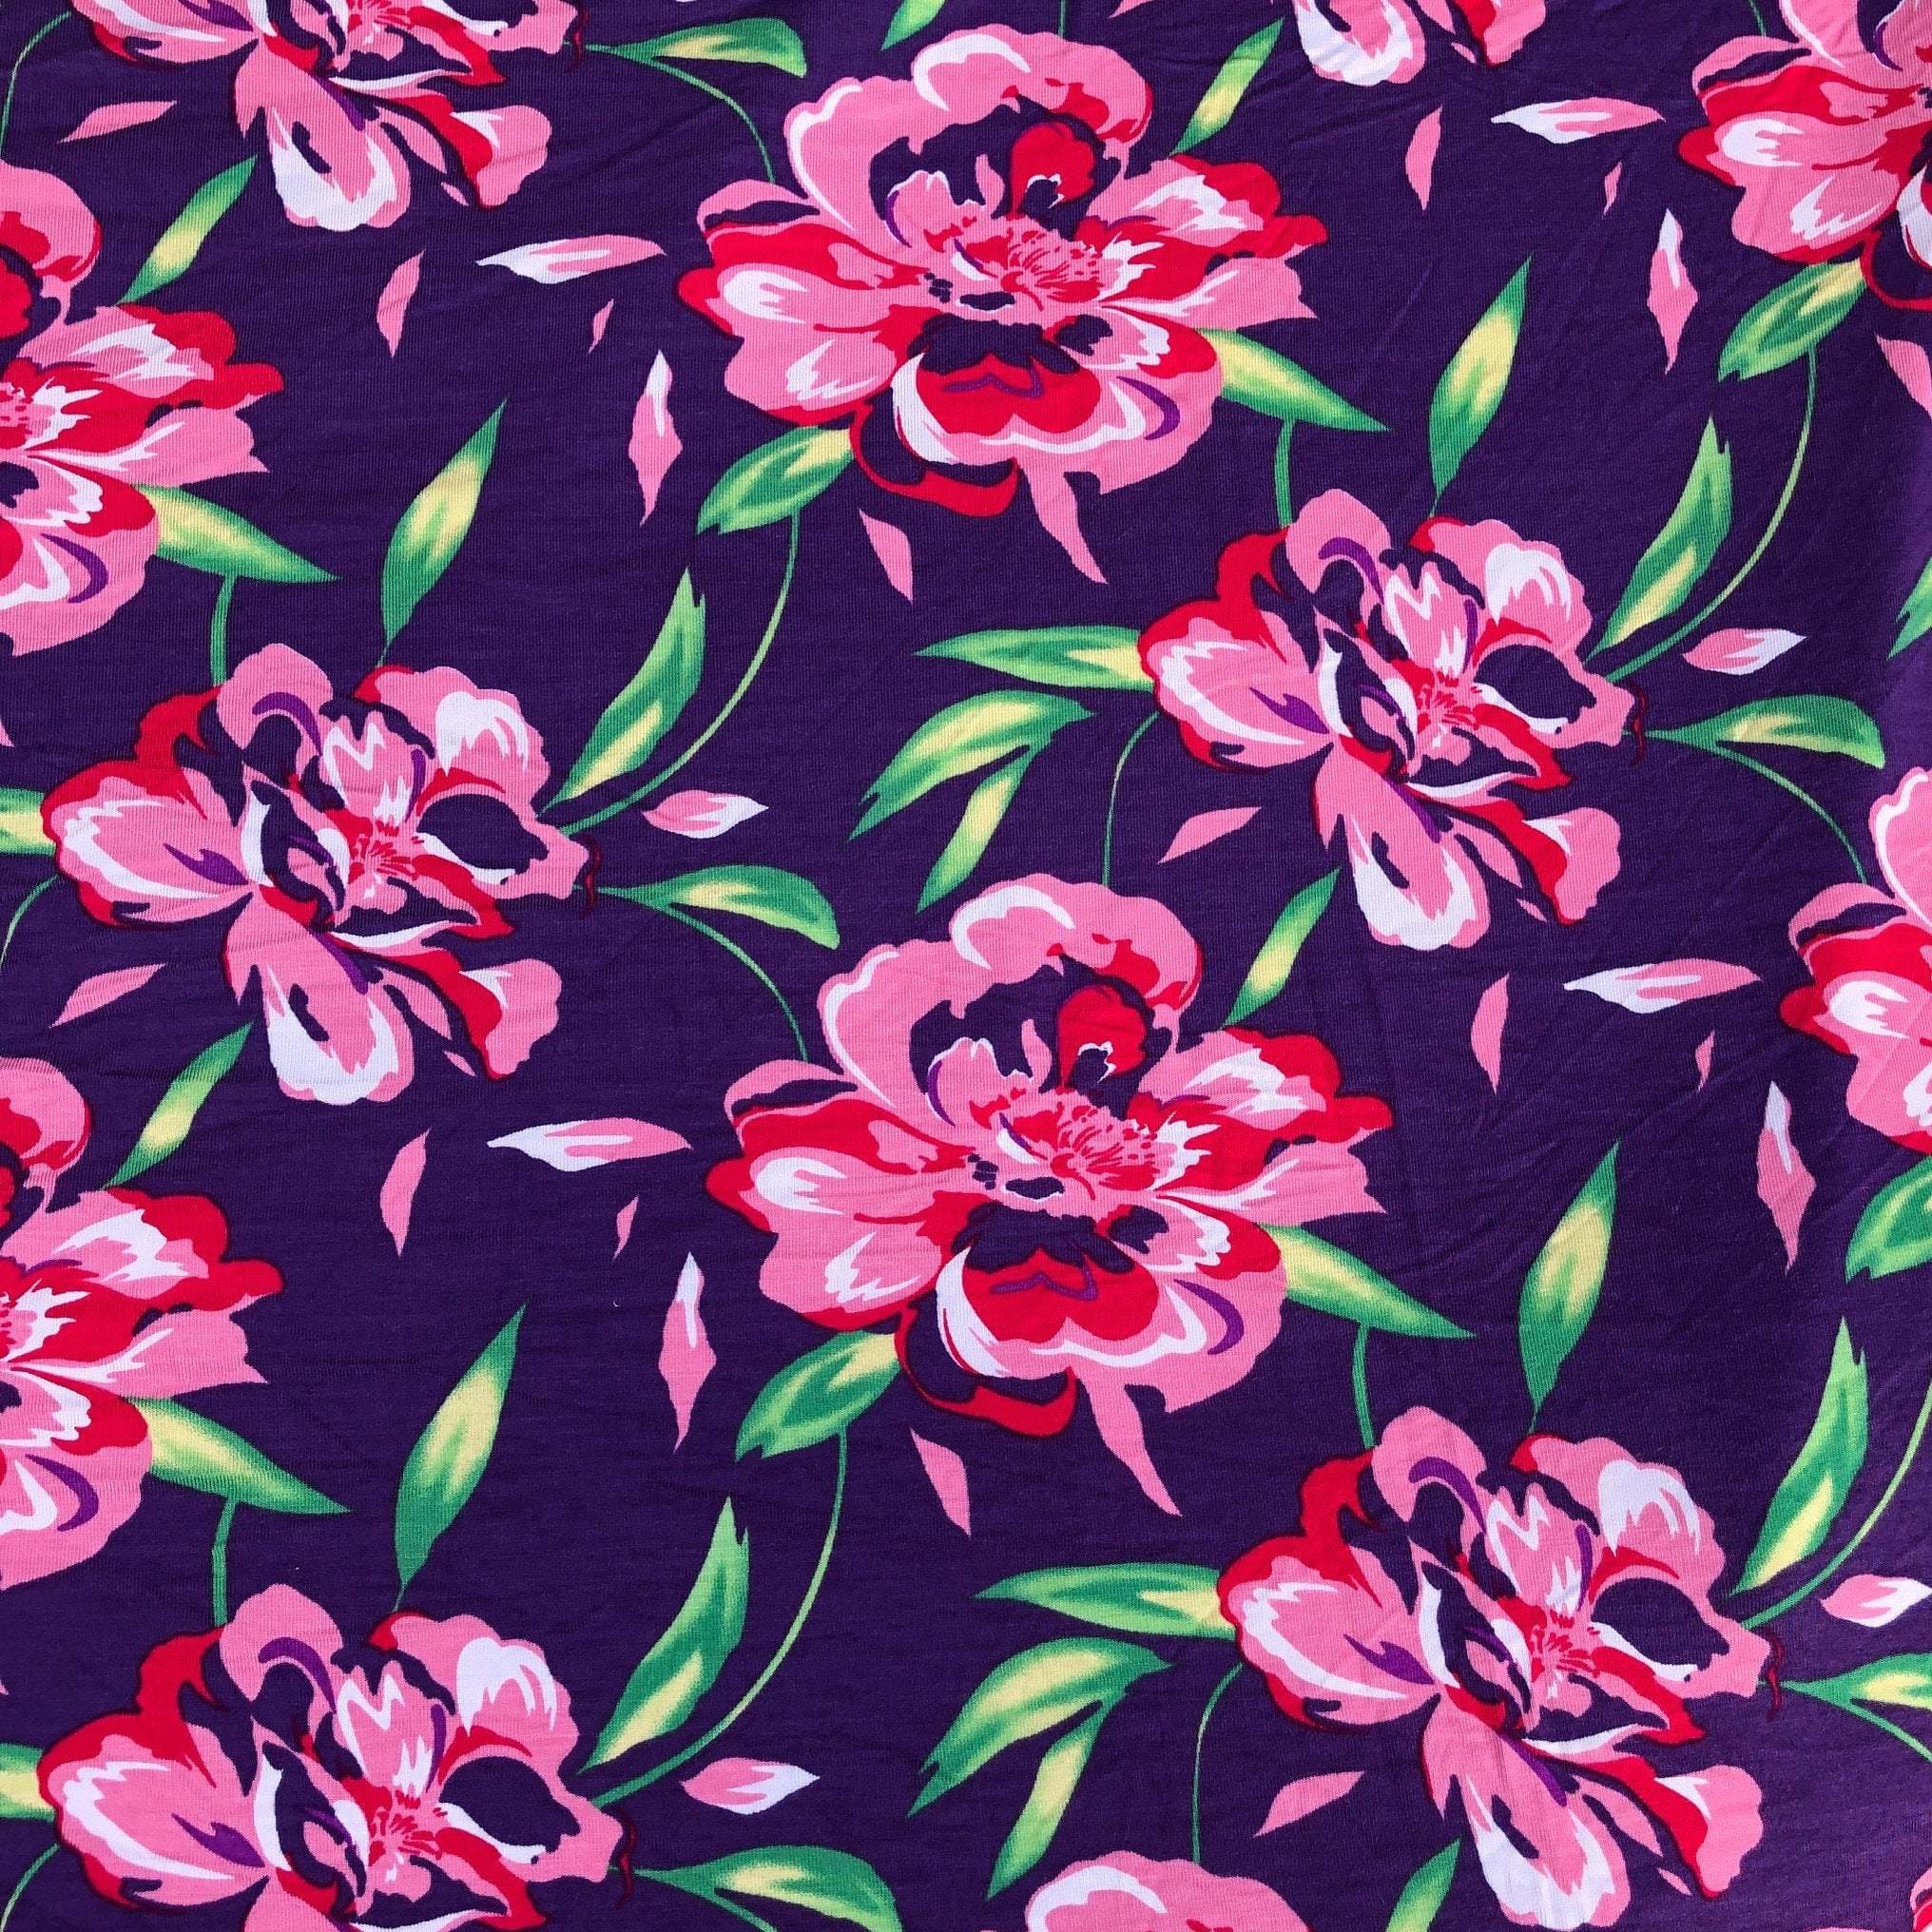 ISEE FABRIC - Fabric by The Yard - Micro Modal Spandex Jersey - Sewing  Products - Sewing Supplies - Craft Supplies & Materials - Fabric for Sewing  - Made in USA - Material for Sewing (Huckleberry) : : Home